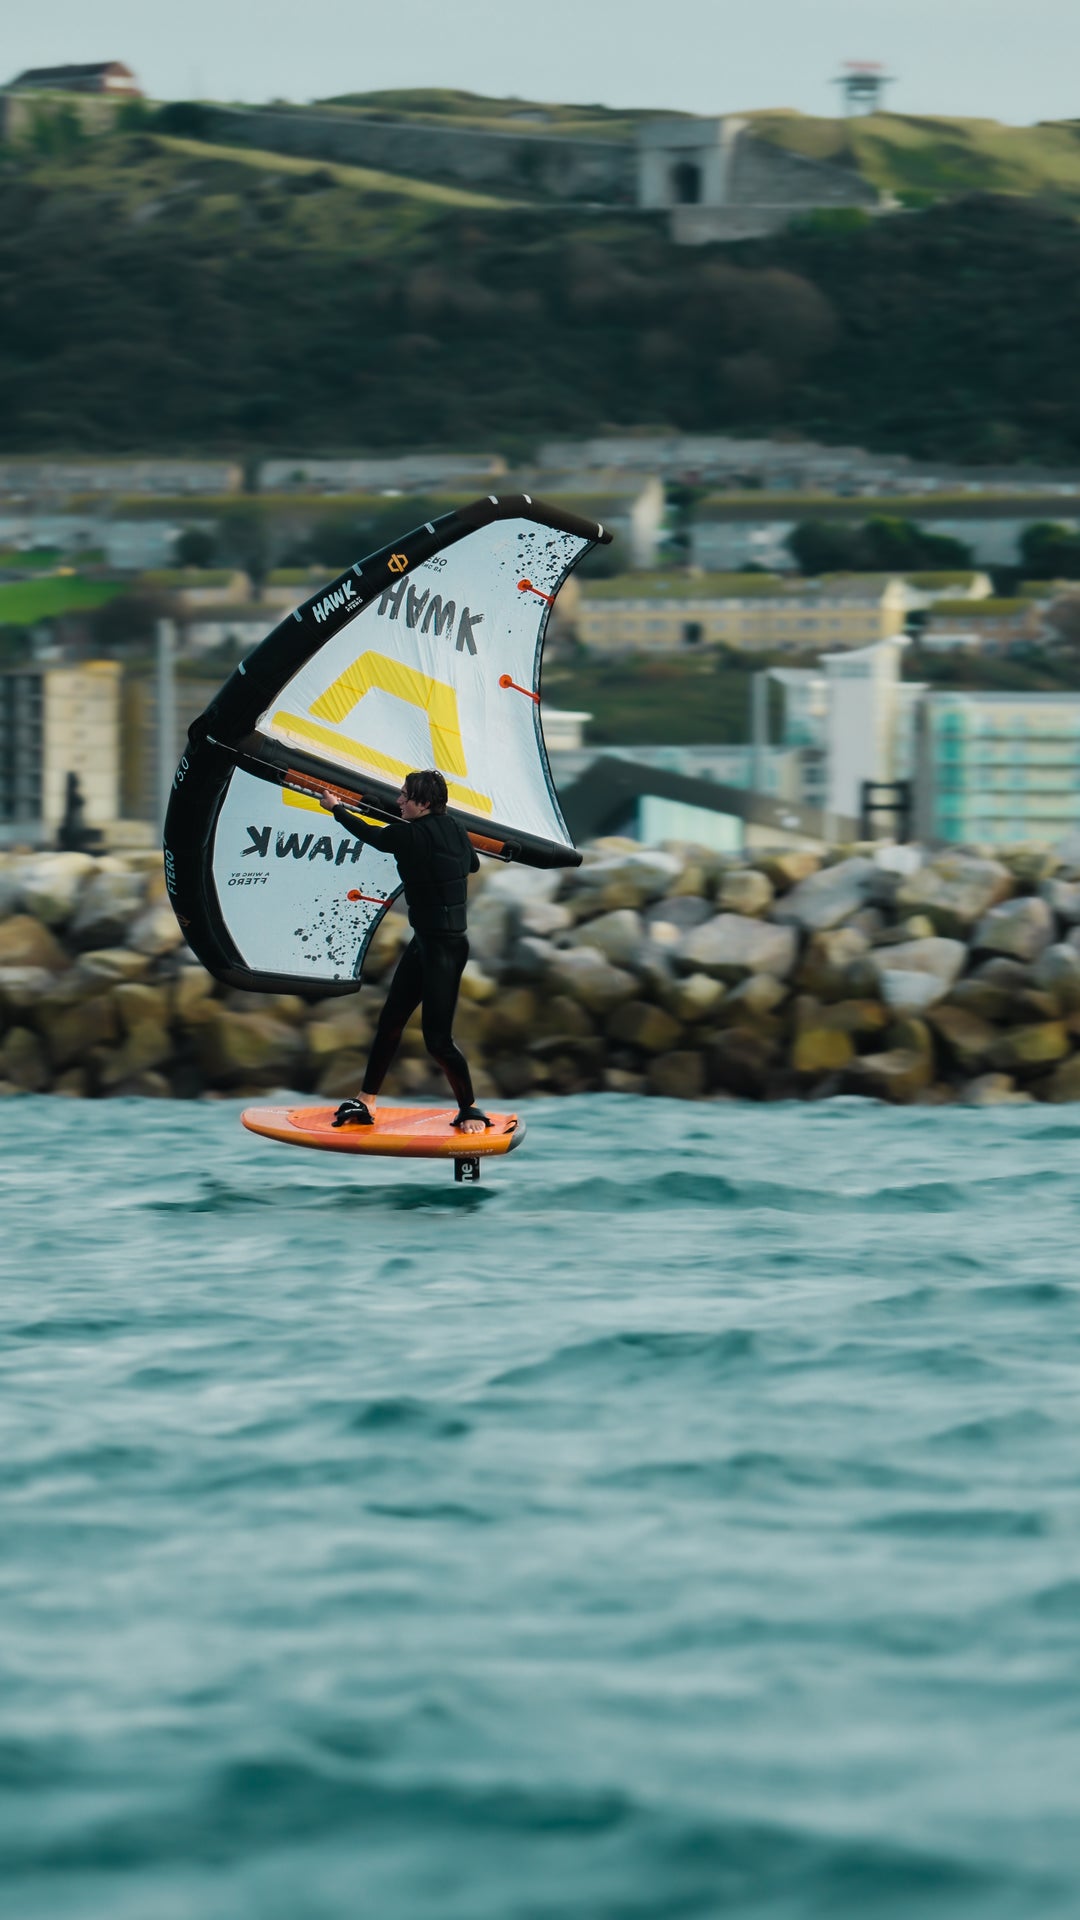 How to Wing Foil Upwind: Mastering the Art of Upwind Riding